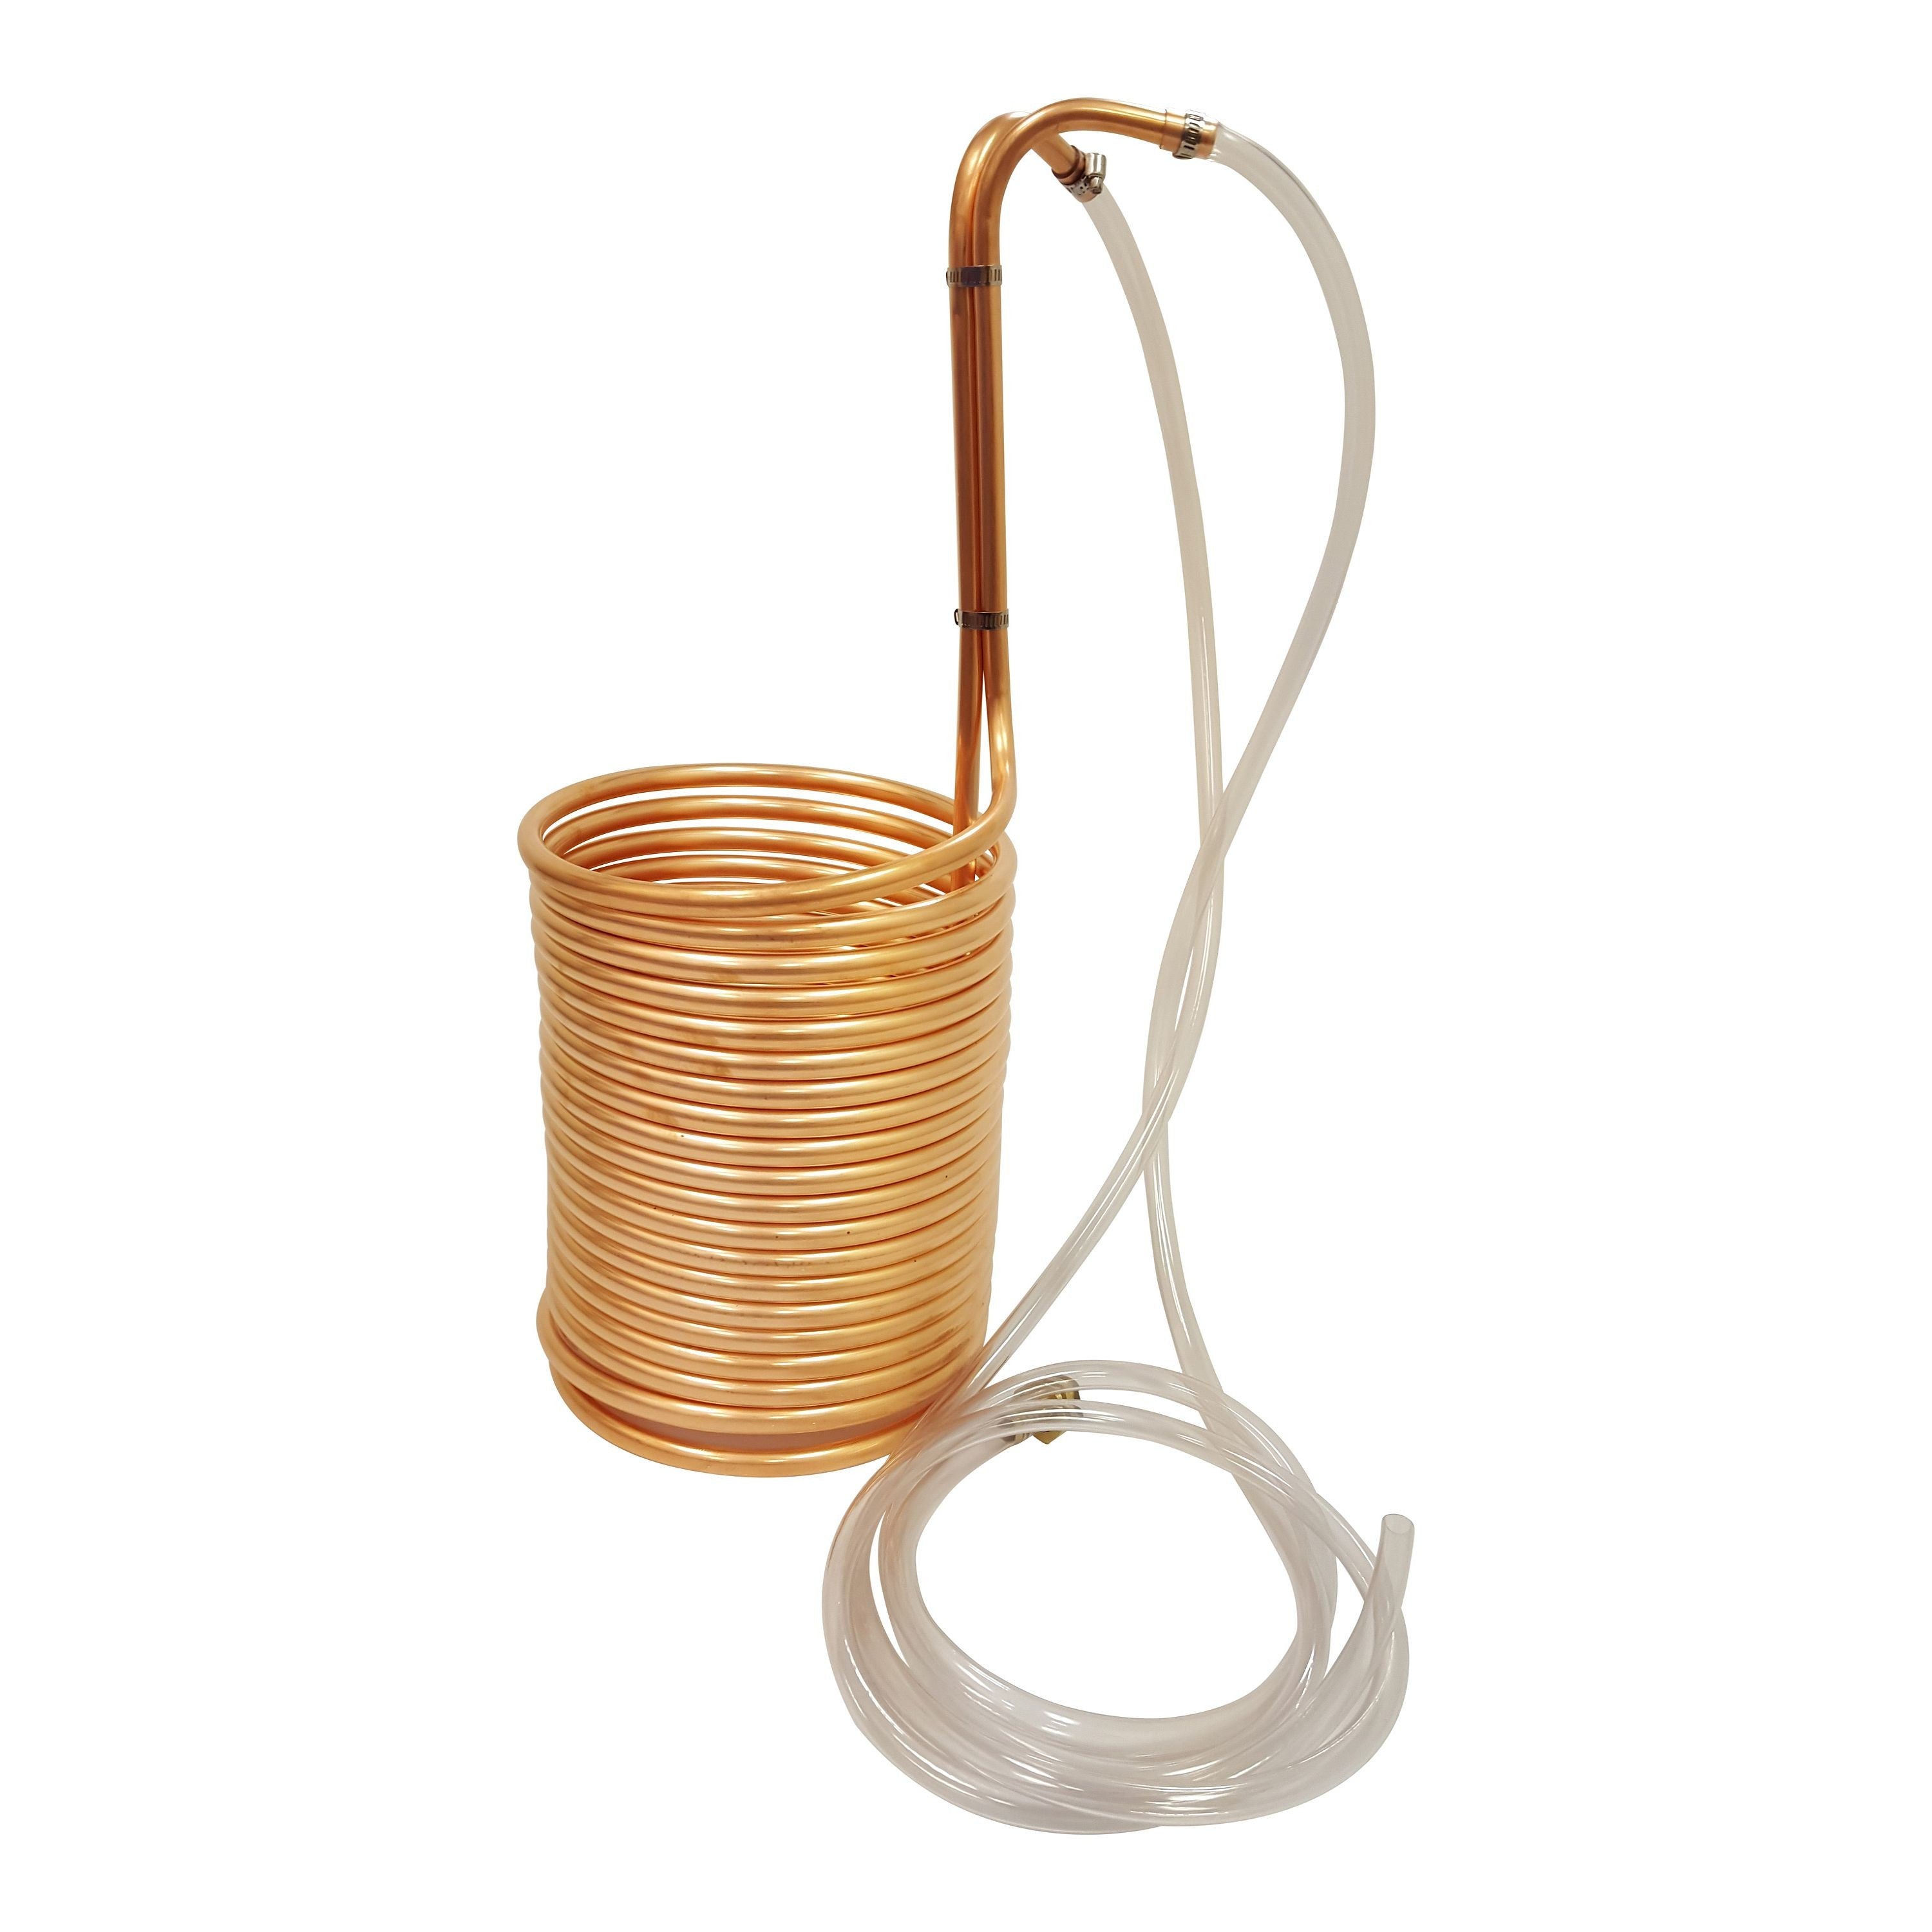 Copper Immersion Wort Chiller with Vinyl Tubing Attachments 1/2" x 50'